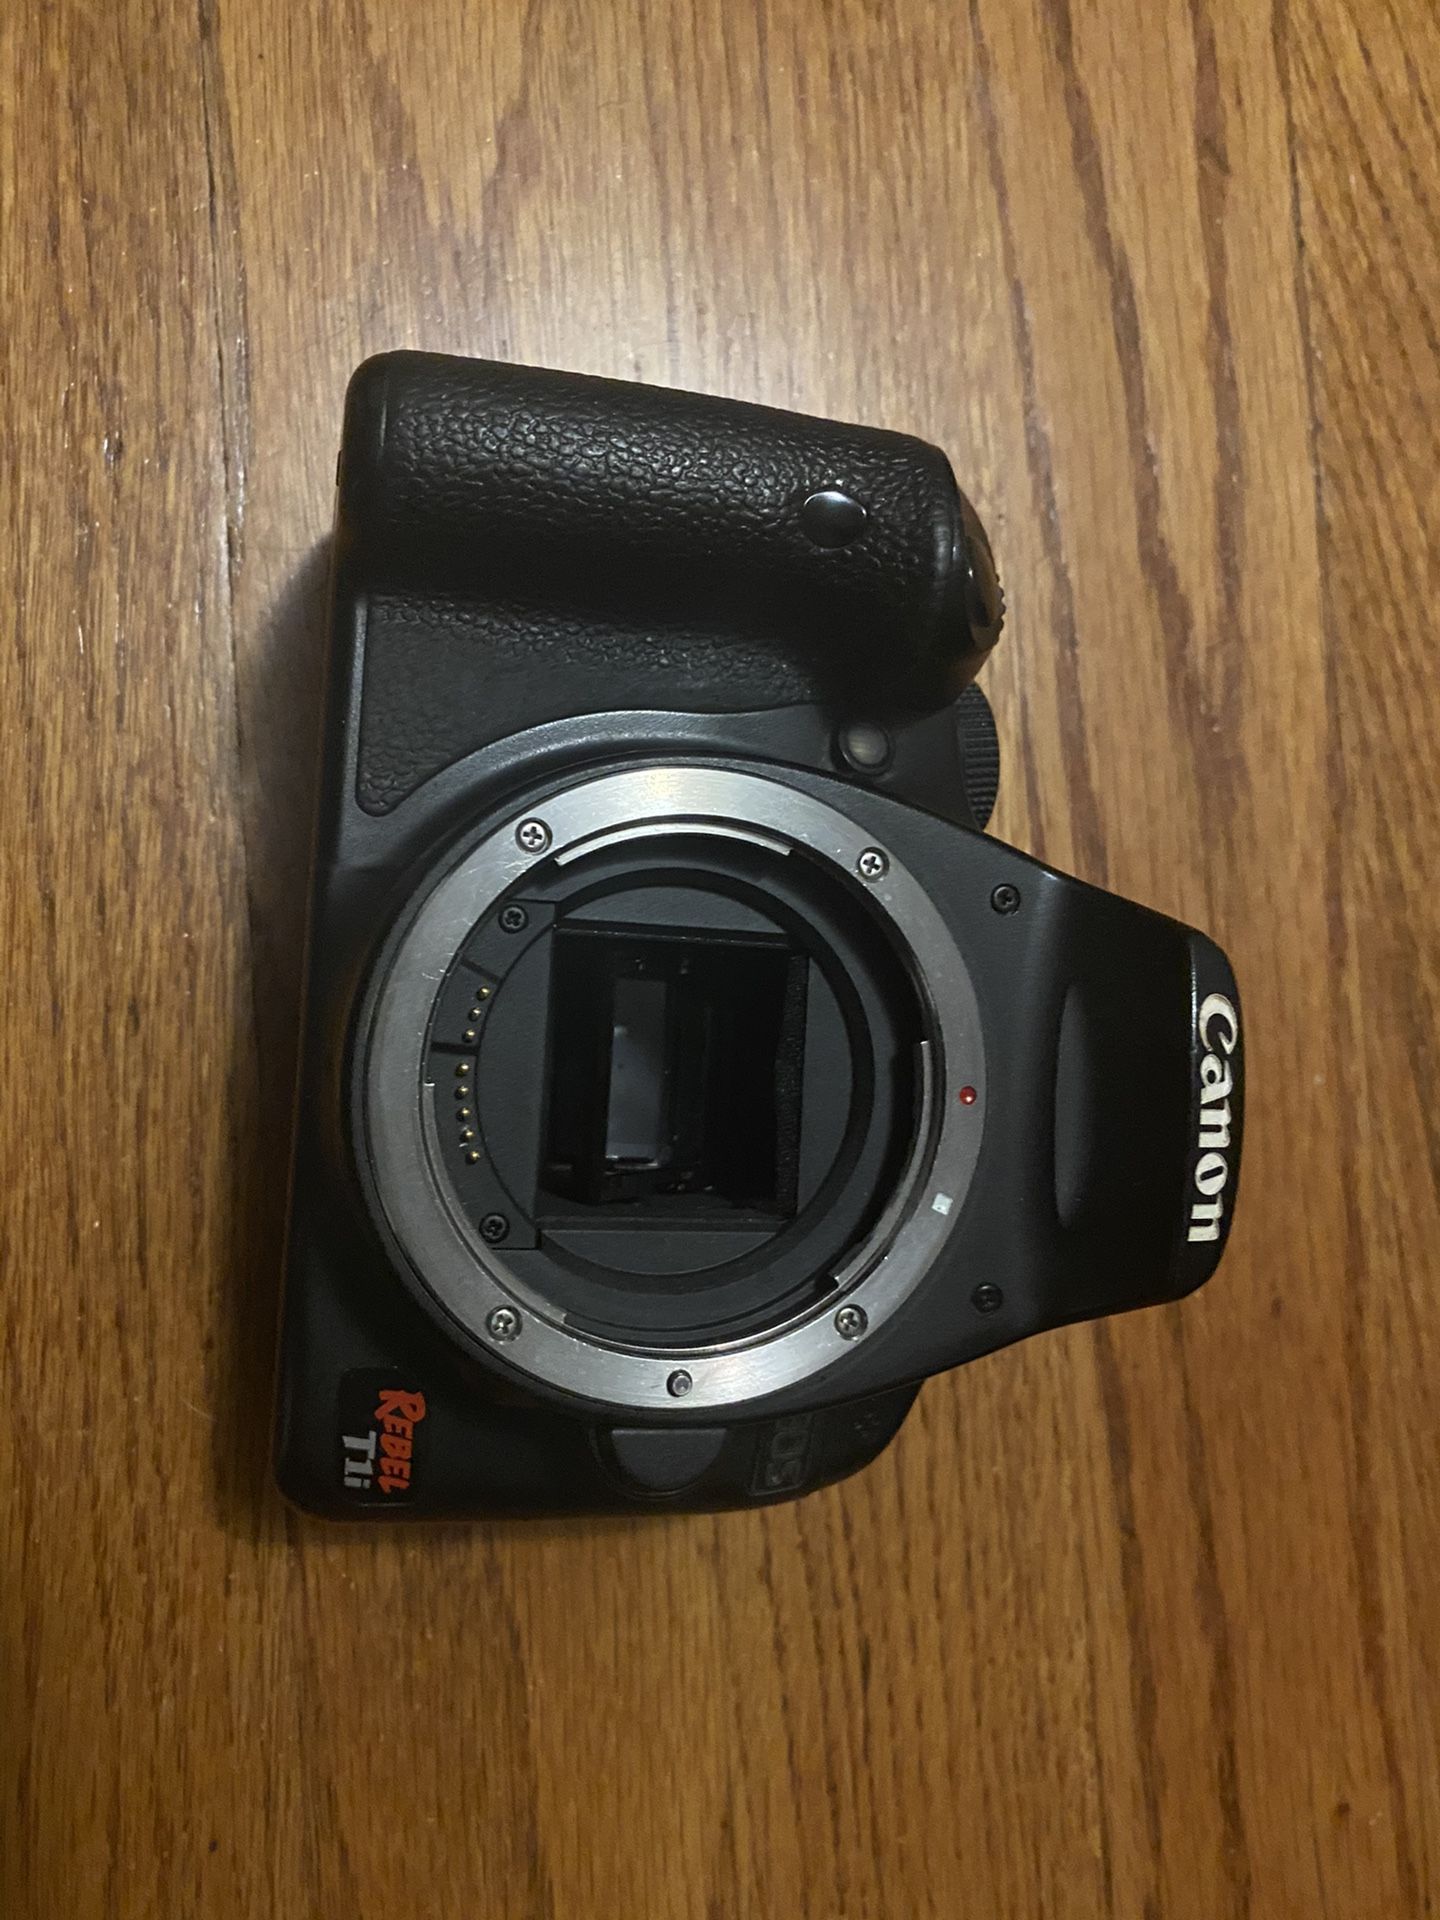 Canon EOS Rebel T1i - parts only